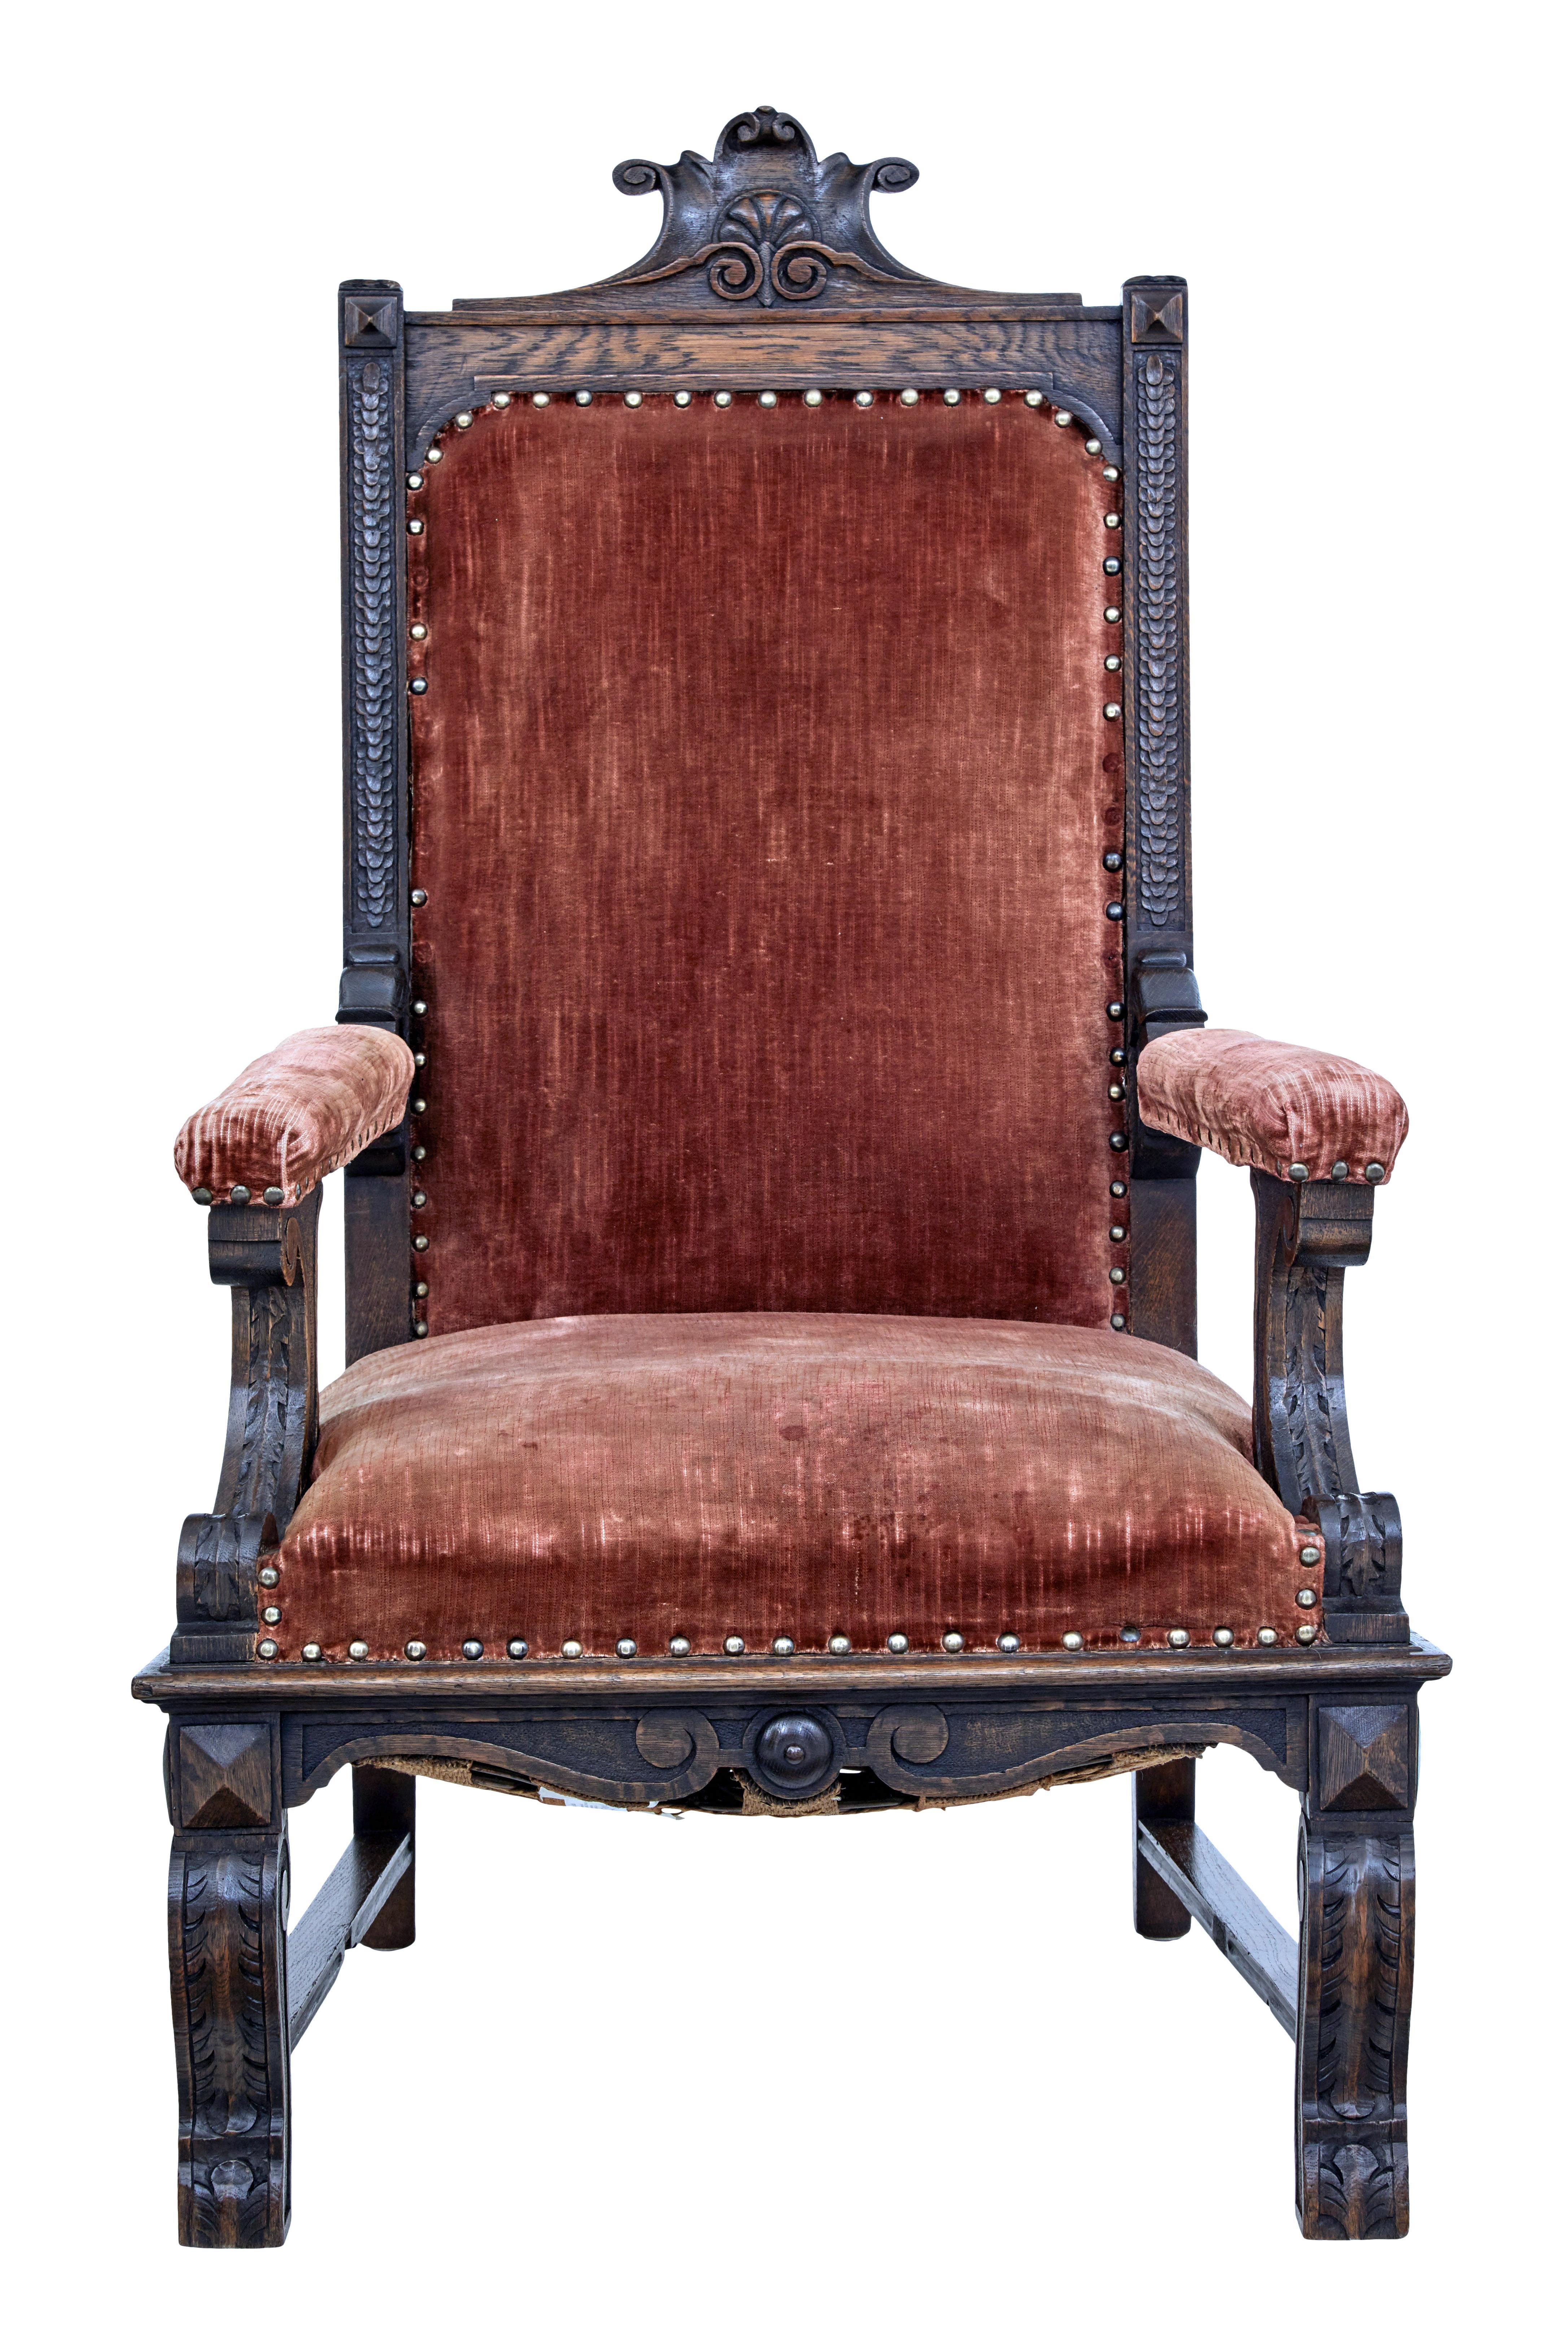 19th century Victorian carved oak throne chair, circa 1880.

Grand carved oak throne chair of generous proportions. Carved back rest with scrolls and shell. Scrolled arm supports and carved front legs in the same taste.

Original upholstery